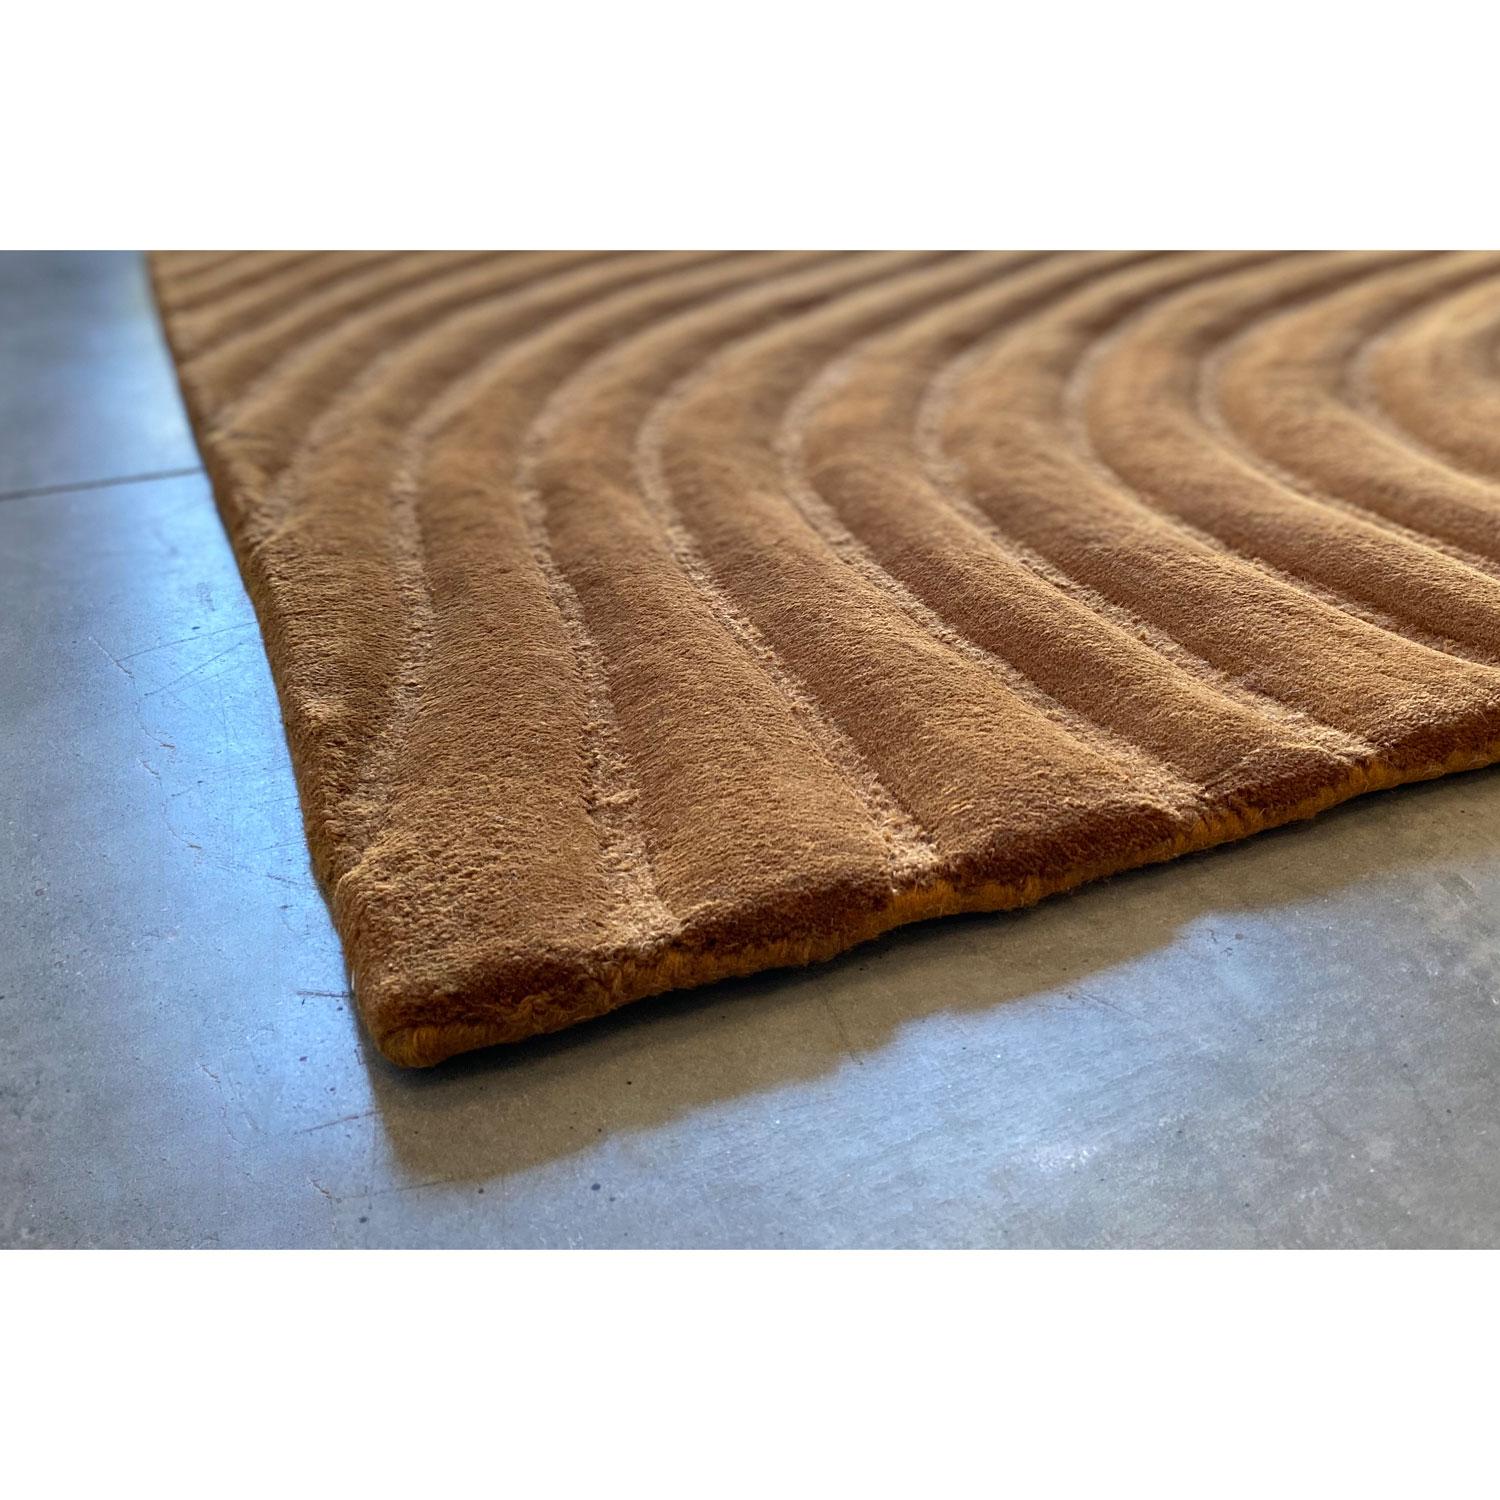 Hand-Carved 21st Cent Living Room Wool Warm Sandy Color Rug by Deanna Comellini 300x400 cm For Sale